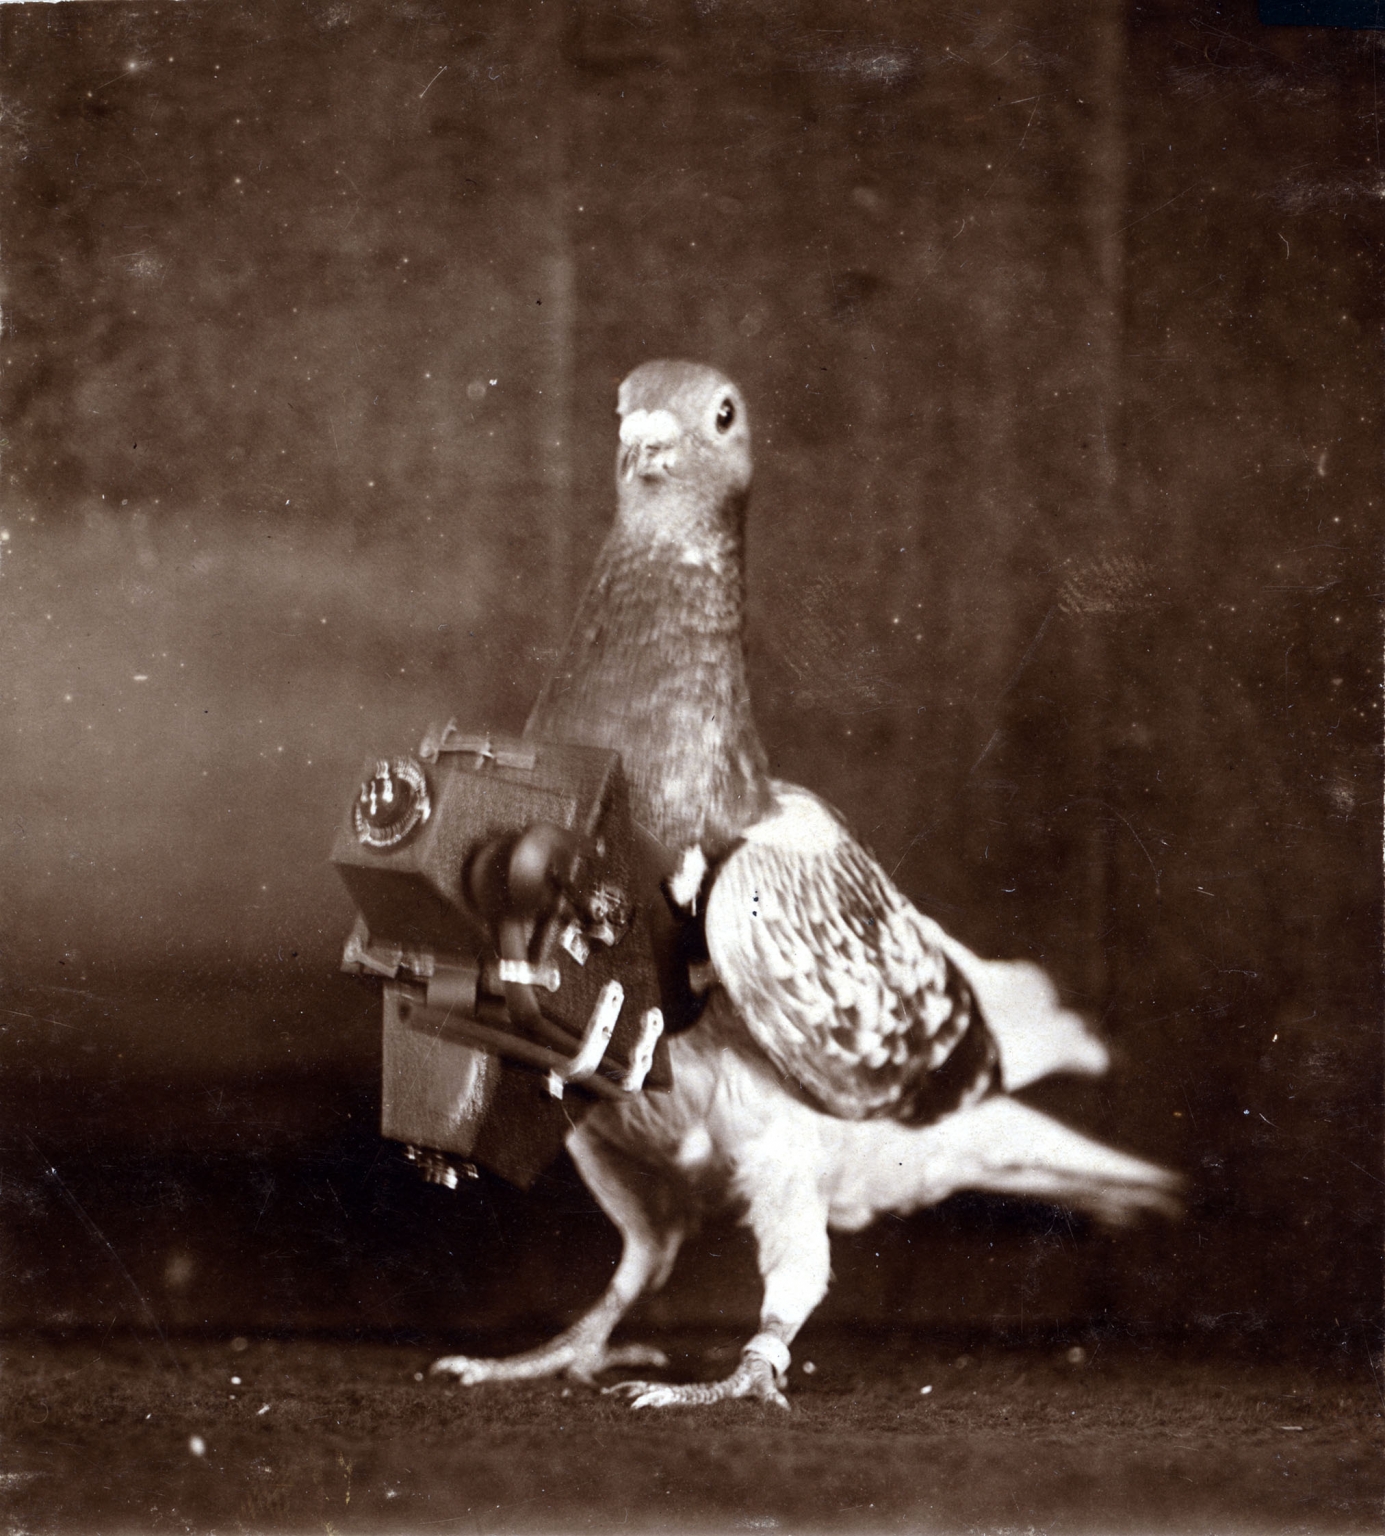 Pigeons with cameras were used in WW1 for aerial reconnaissance